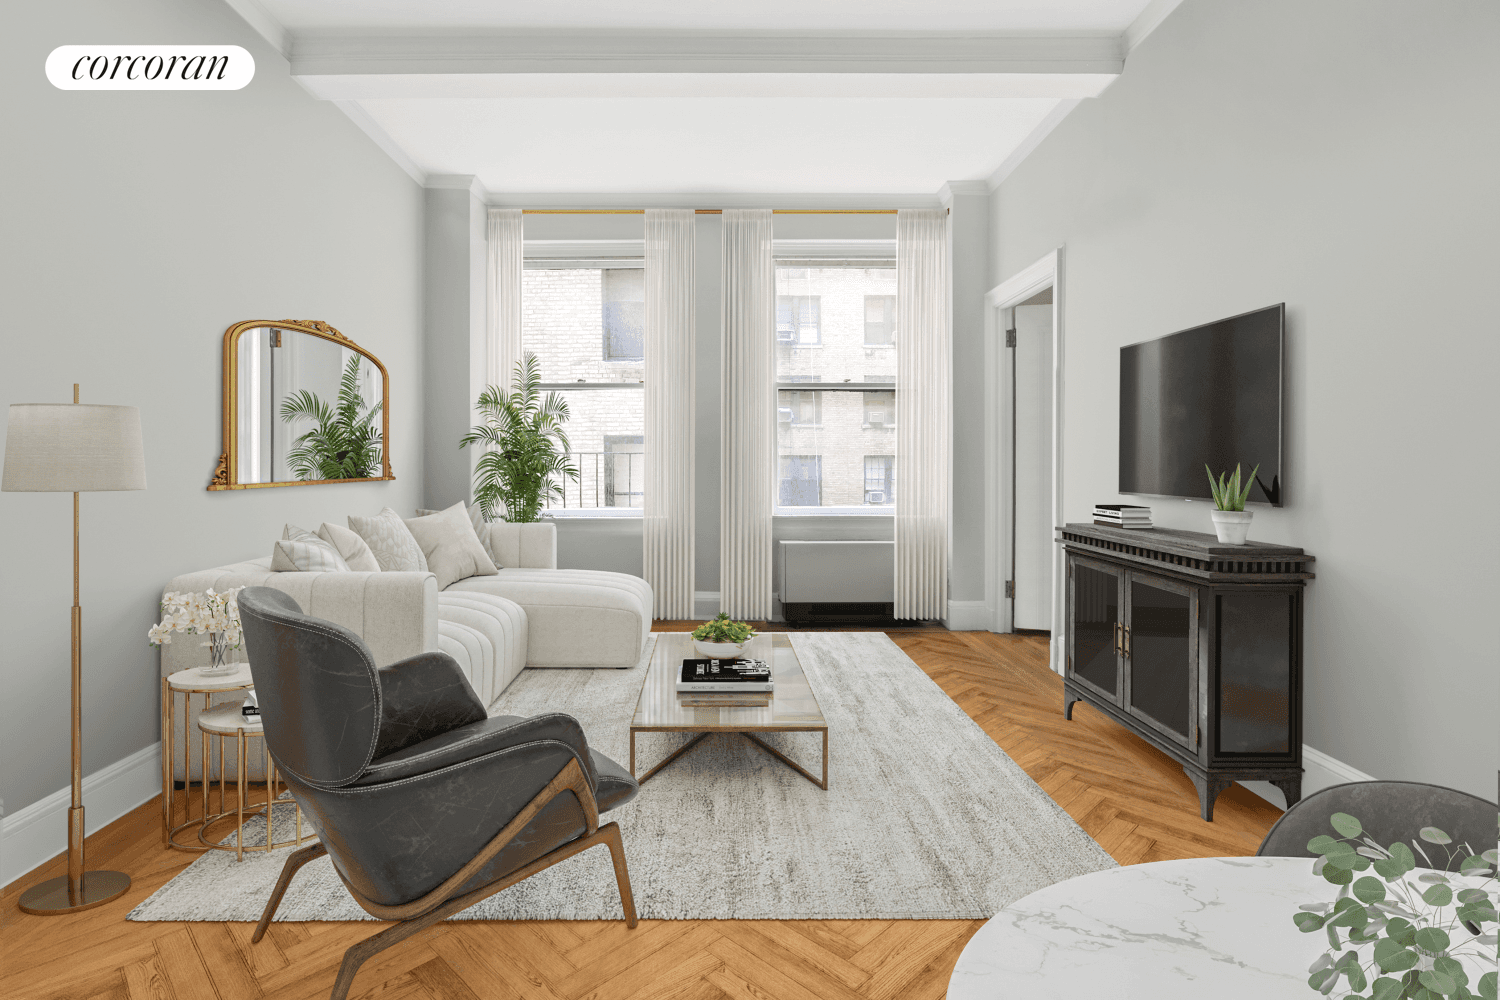 PRIME CARNEGIE HILL ! Residence 3A at 1060 Park Ave represents an irresistible proposition in one of the most desirable locations in the city.